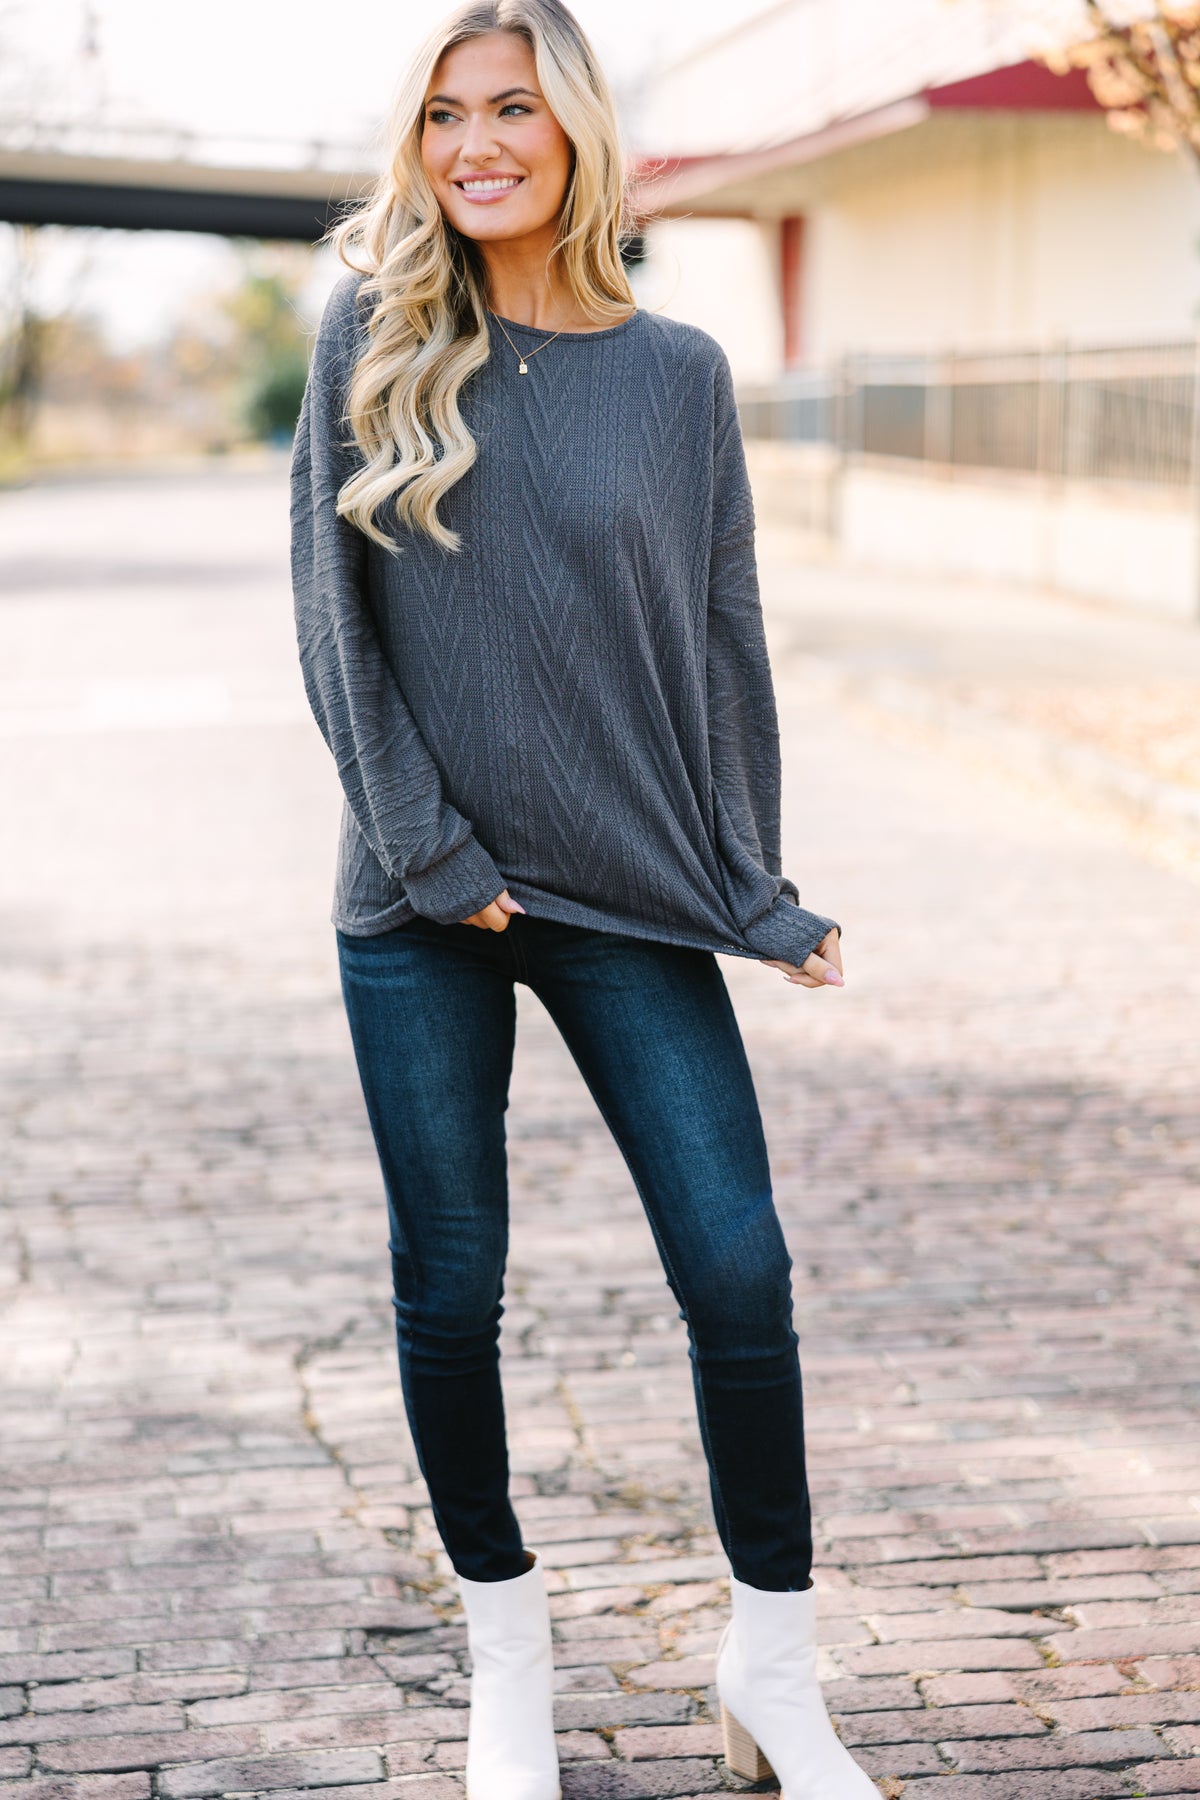 The Slouchy Ask Gray Cable Knit Top – Shop the Mint